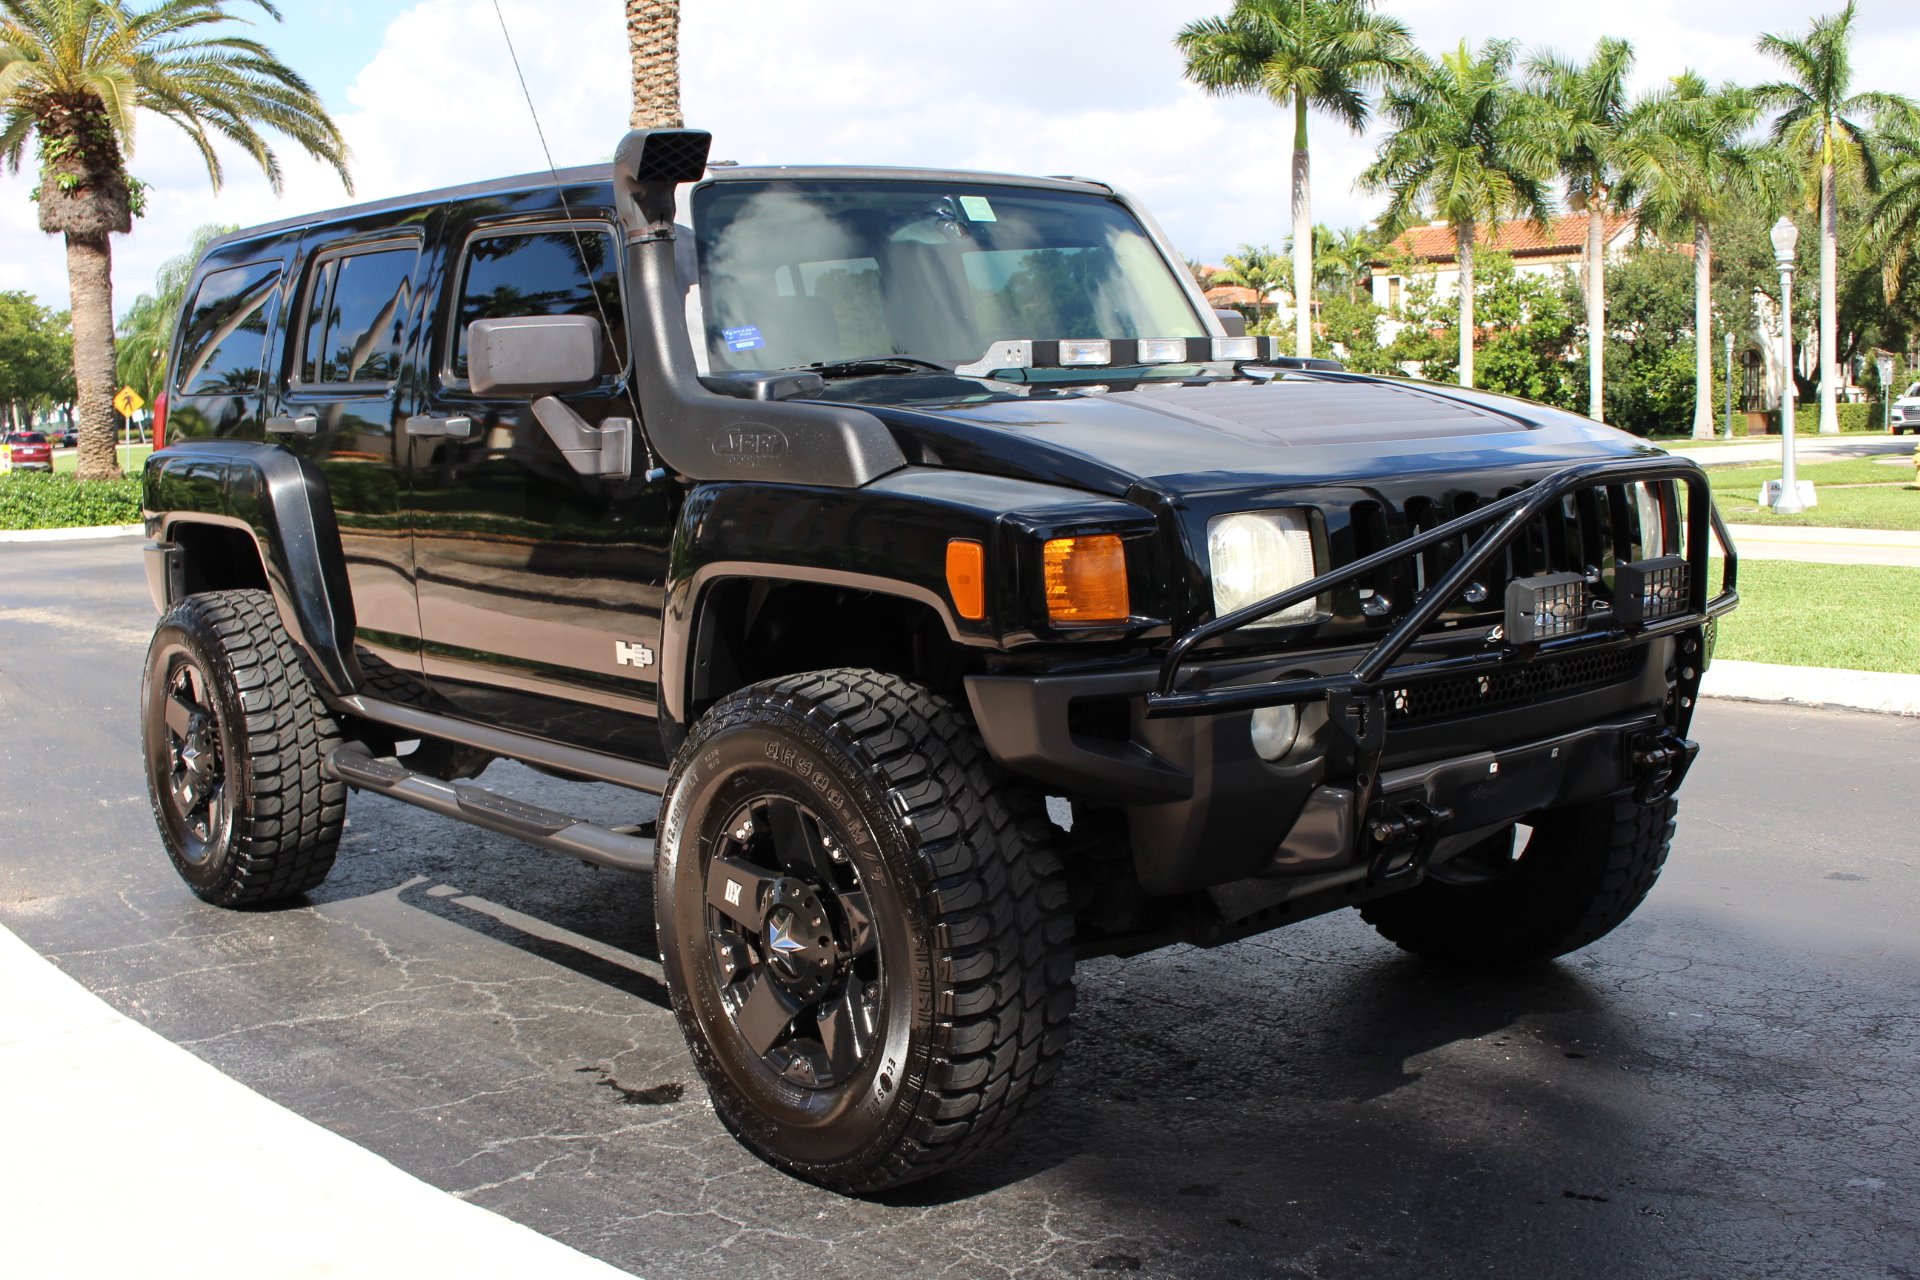 Used 2007 HUMMER H3 Adventure for sale Sold at The Gables Sports Cars in Miami FL 33146 4